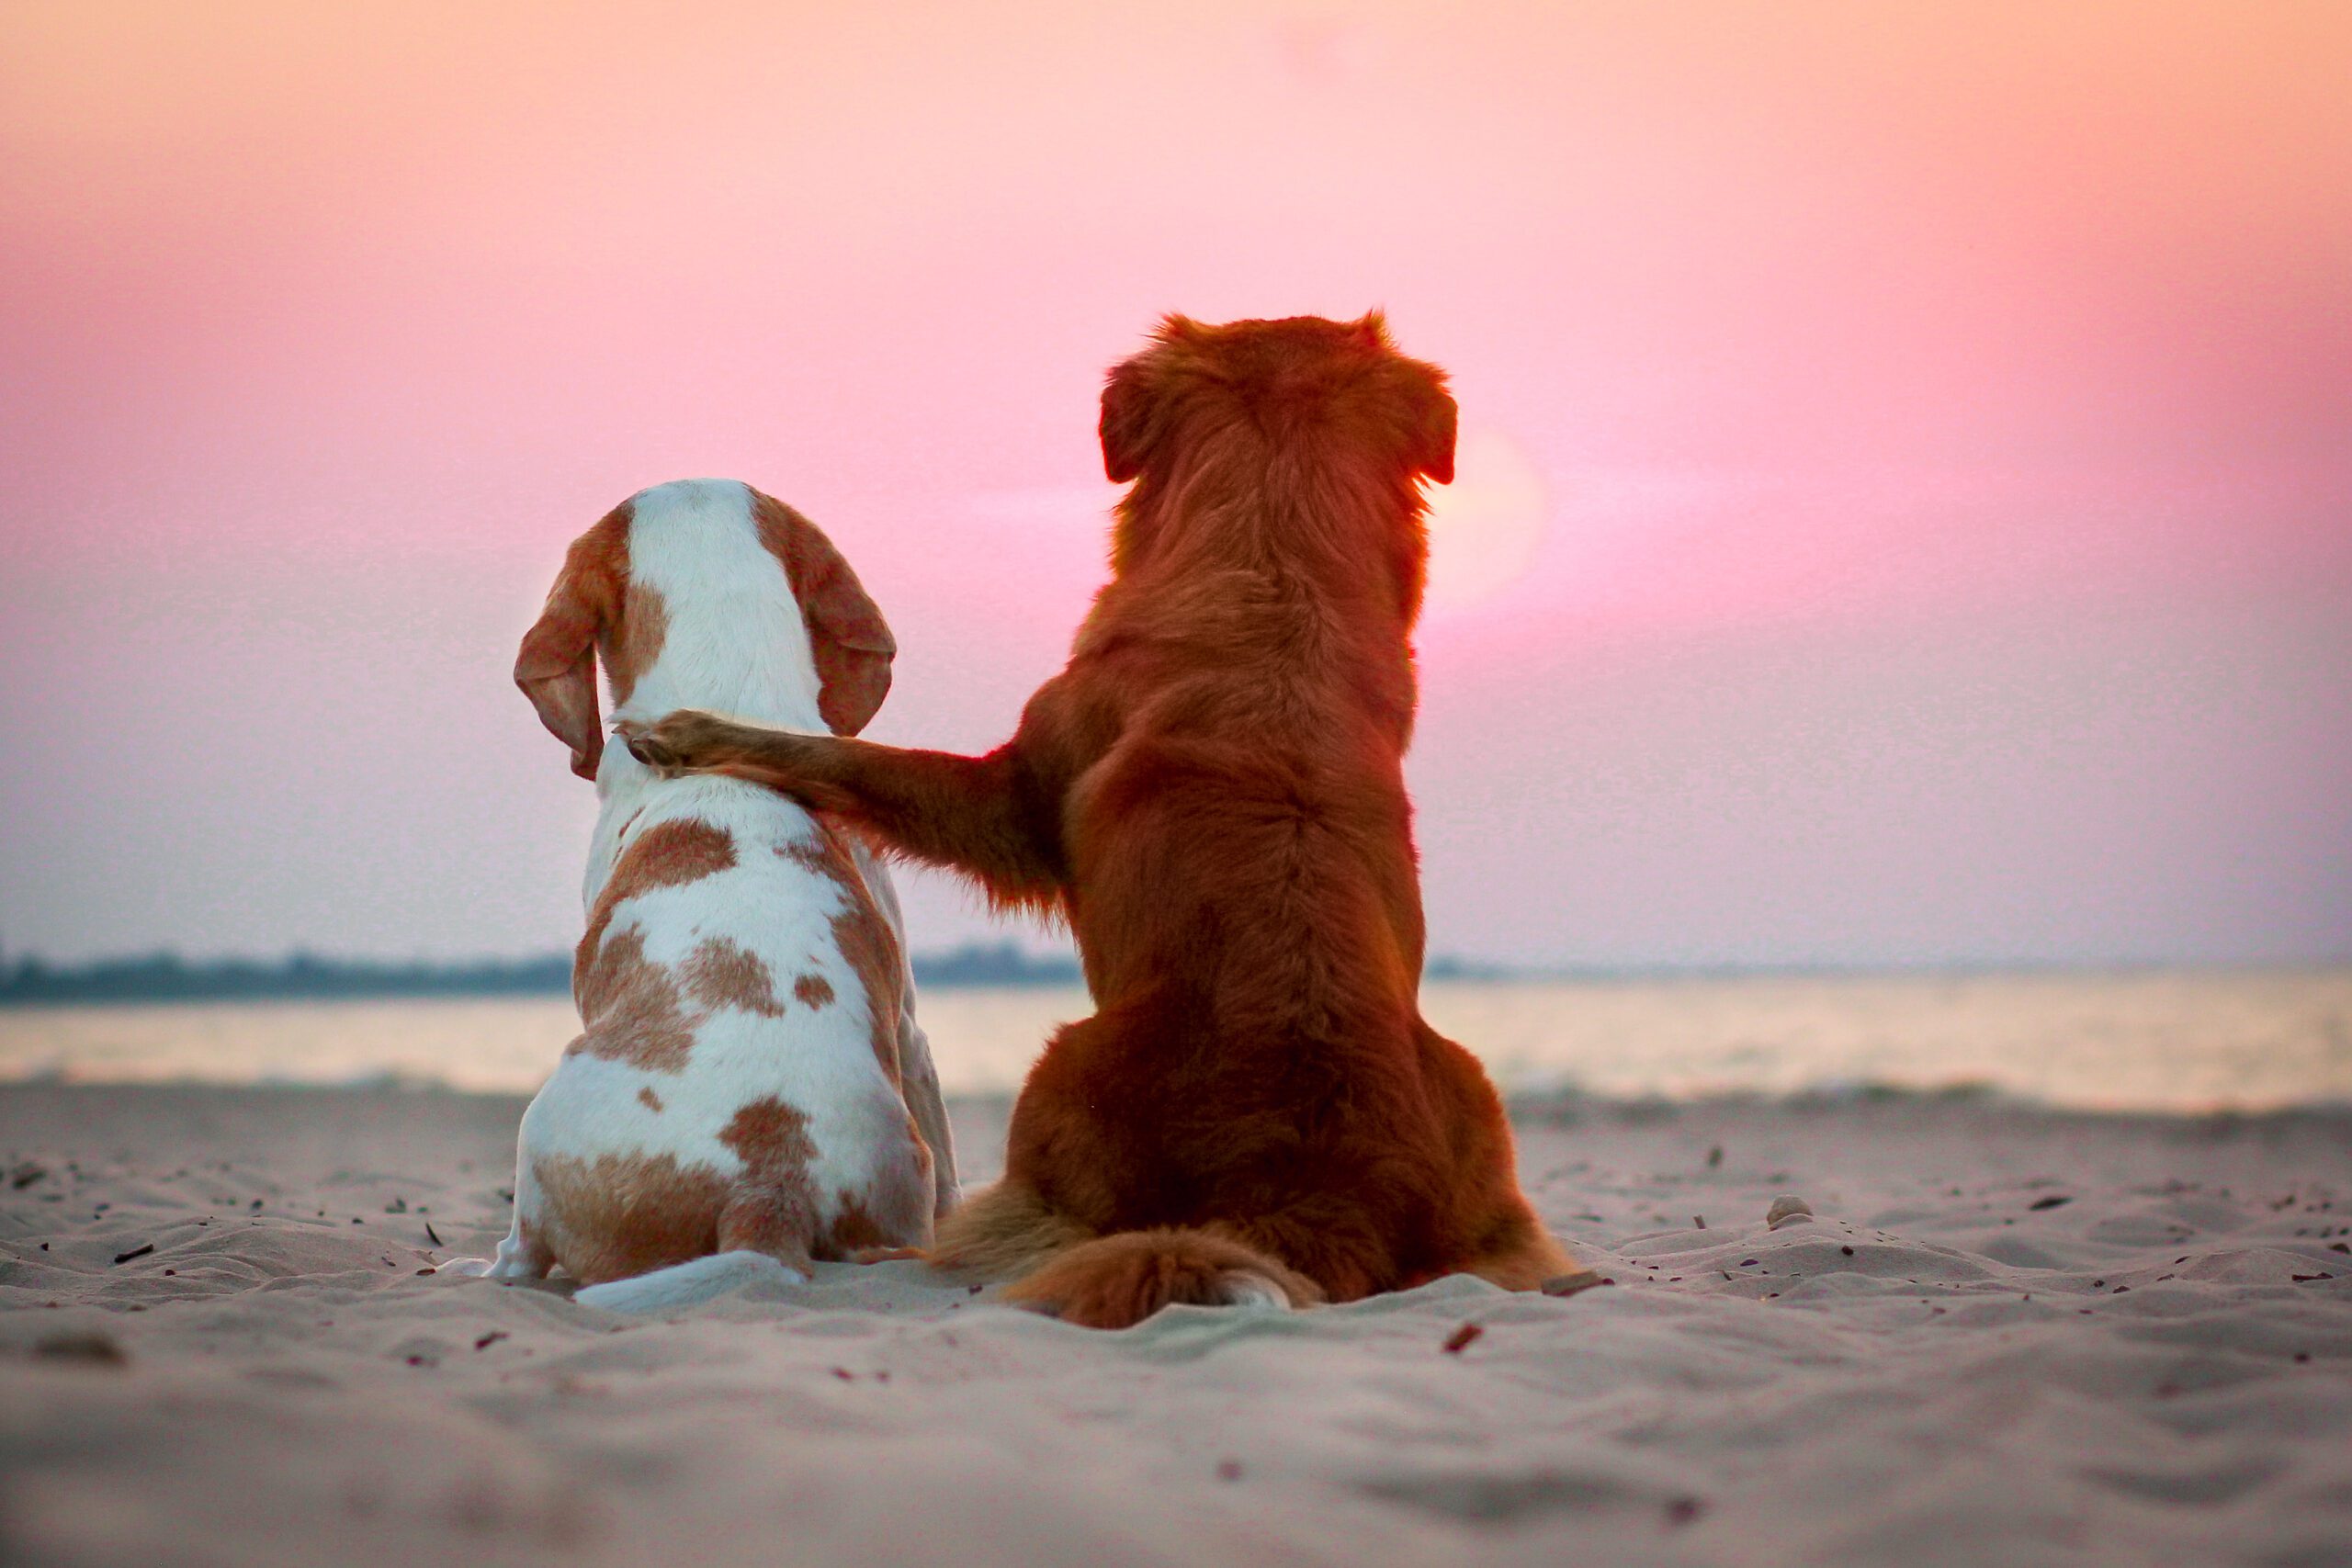 Beagle dog and nova scotia duck tolling retriever friends watching the sunset on a beach at the seaside. Two dogs hugging together.